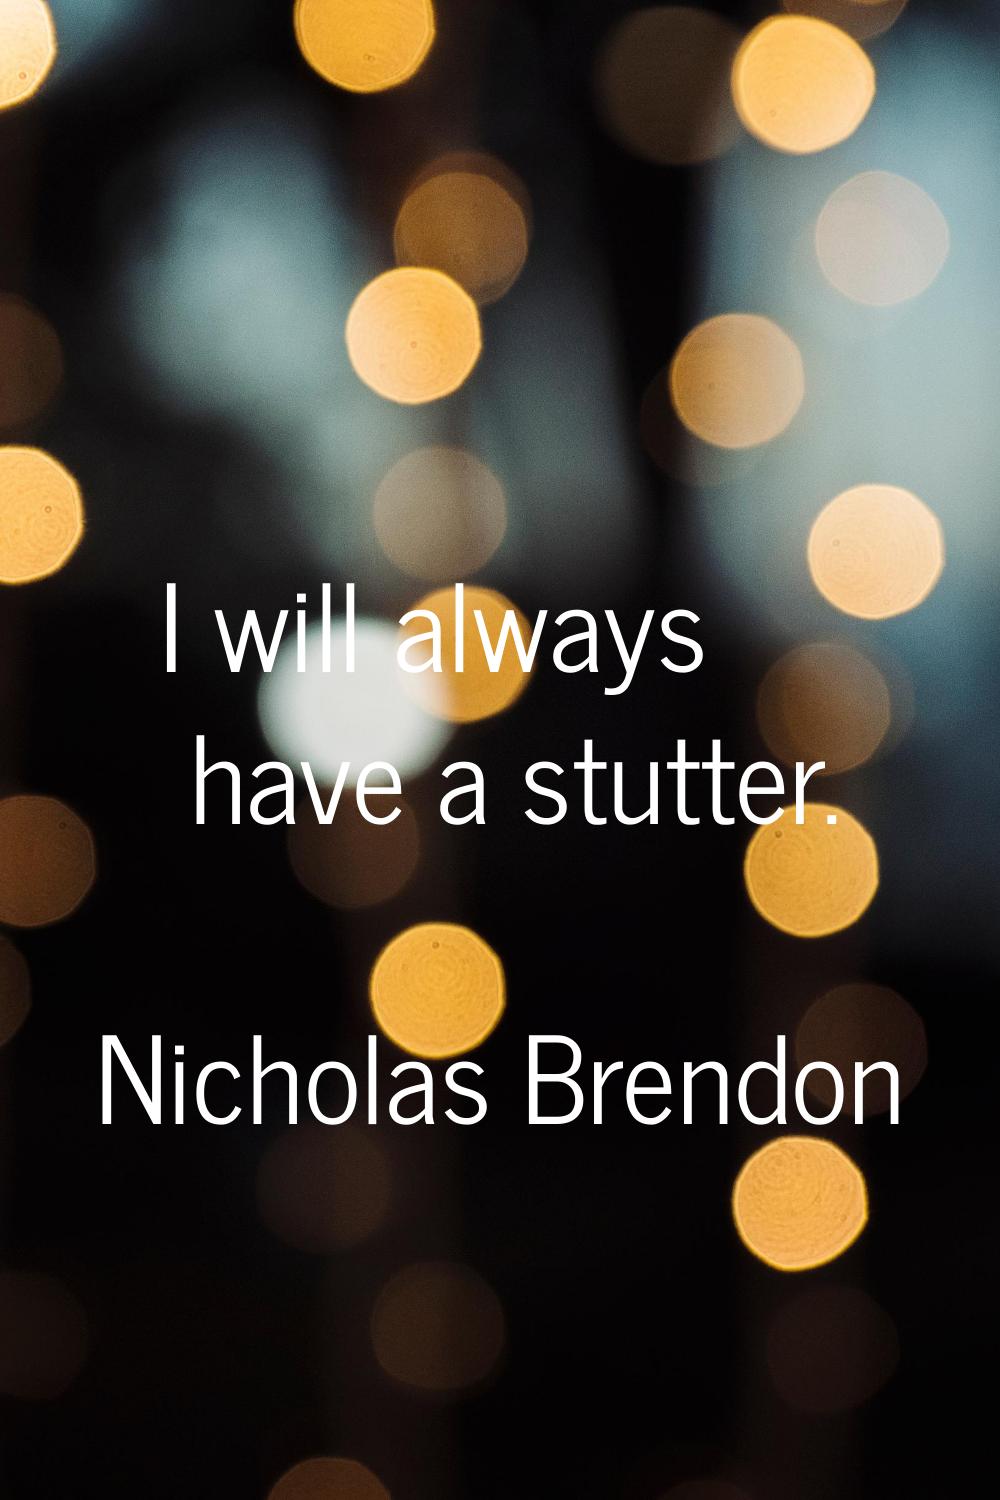 I will always have a stutter.